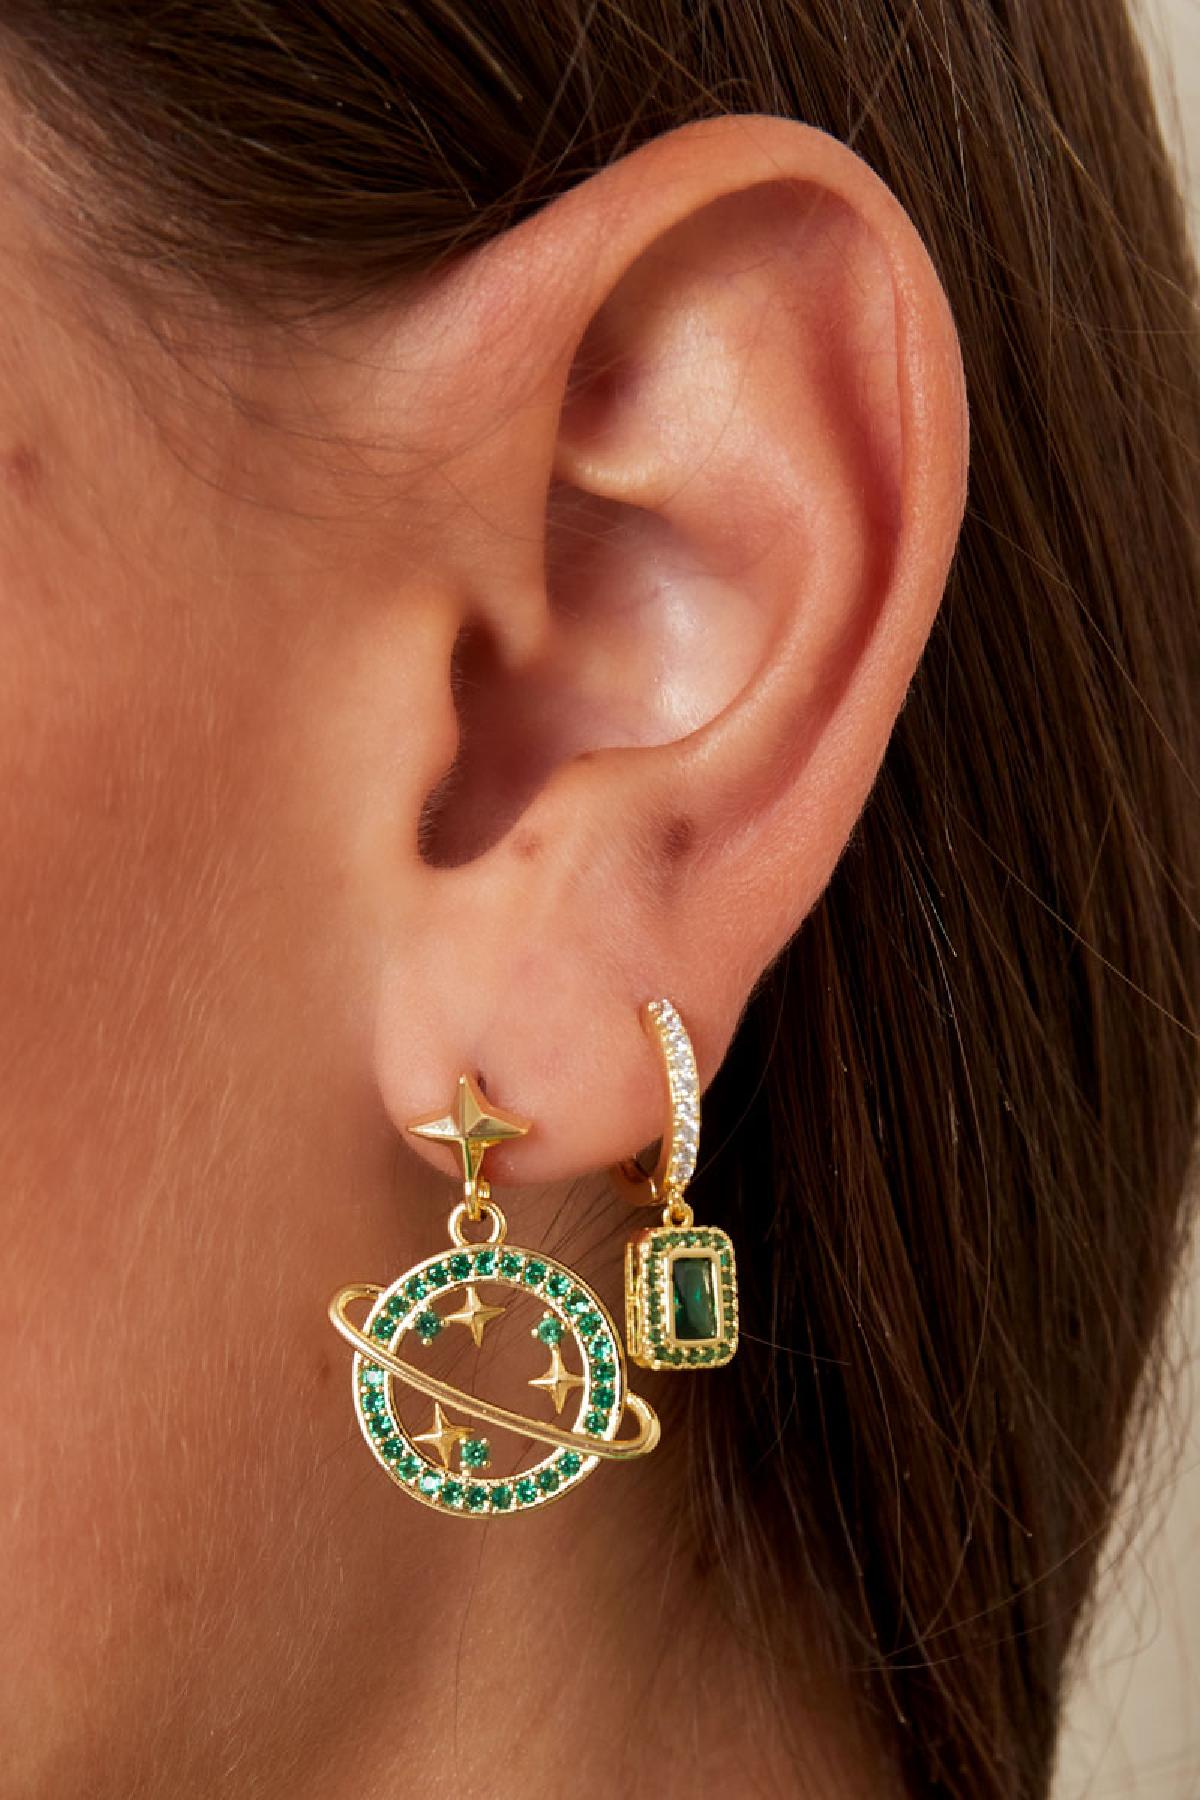 The Edit - Gold Tone Sparkle Planet Earrings in Green